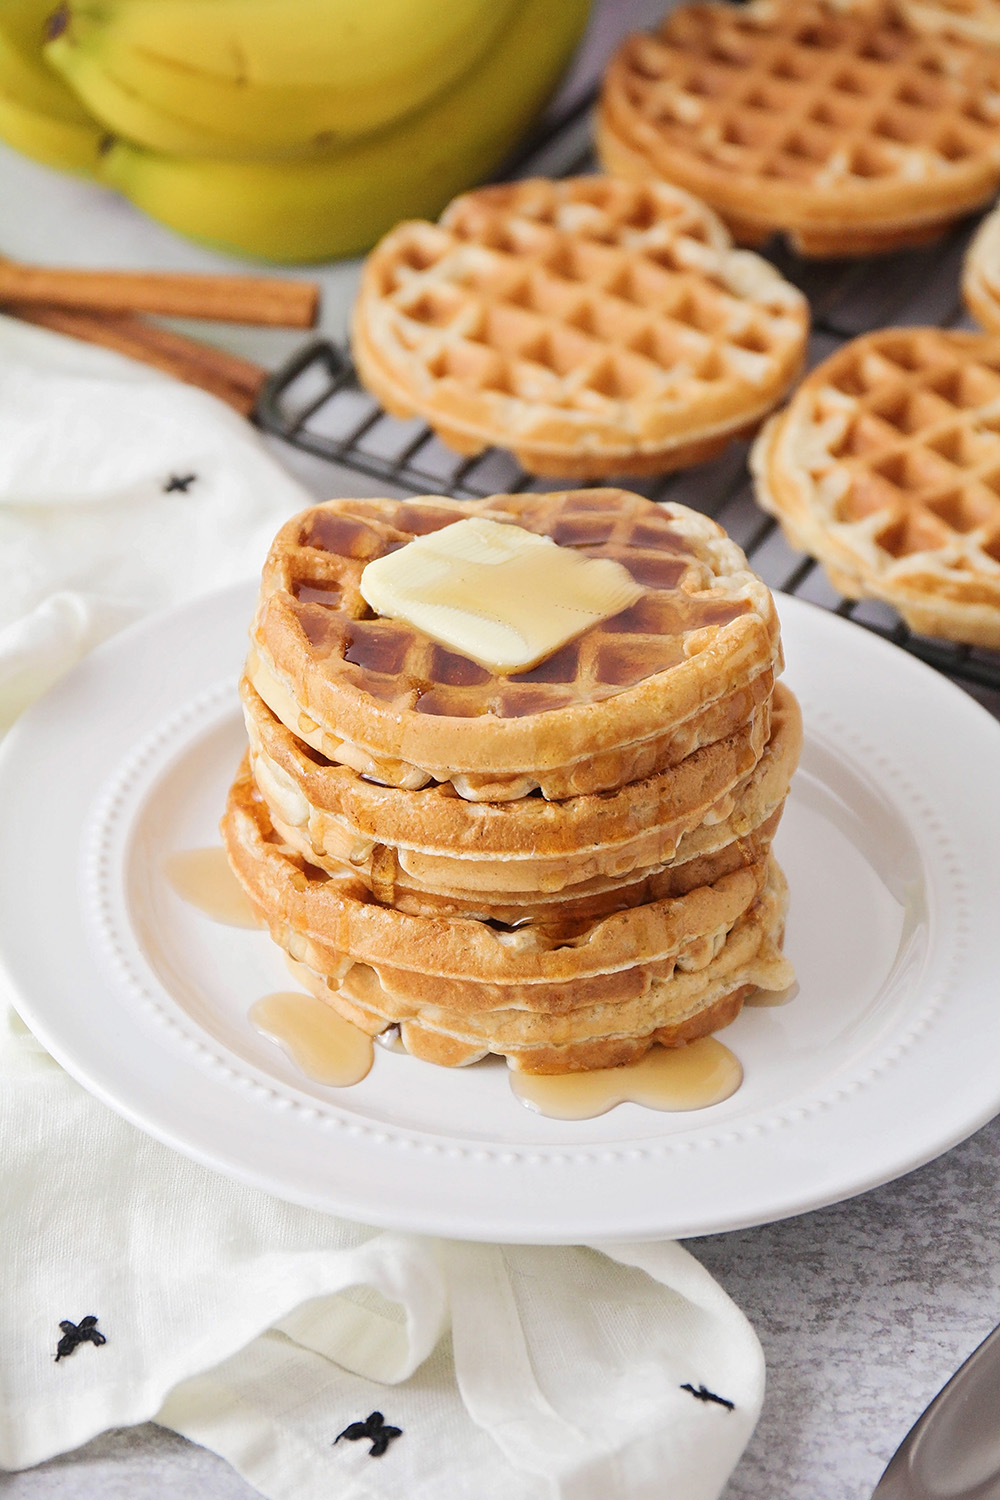 These cinnamon banana waffles have the perfect banana flavor. They're easy to make, and totally delicious!